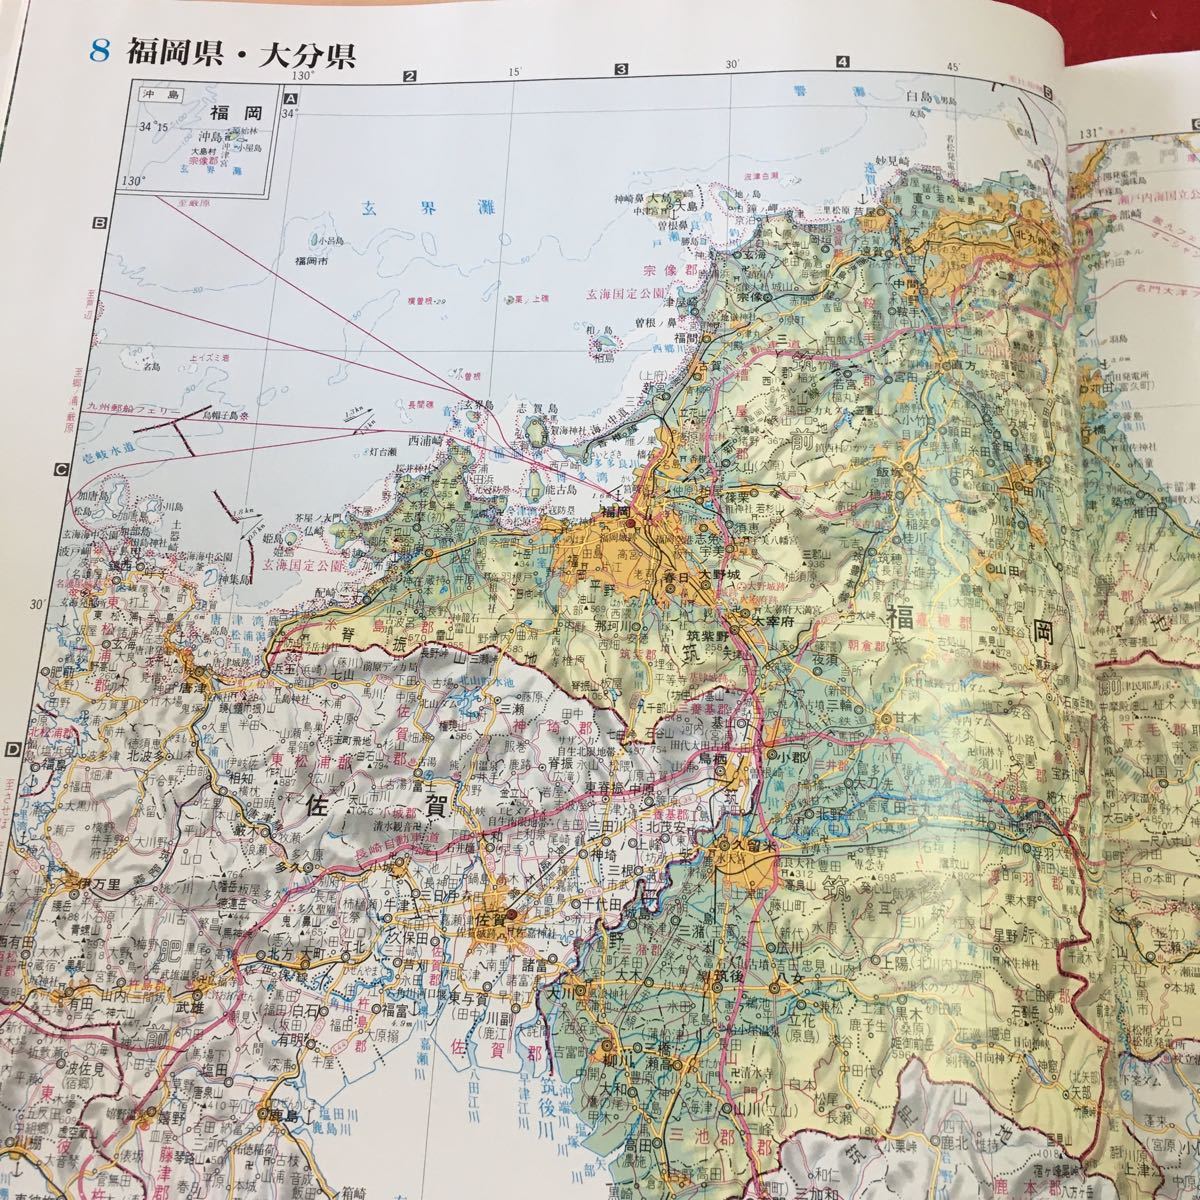 m4^-010 Japan row island large map pavilion compilation person ... Hara 1990 year 12 month 20 day the first version no. 1. issue Shogakukan Inc. all country map materials Japan row island Hokkaido Tohoku district Kanto district 